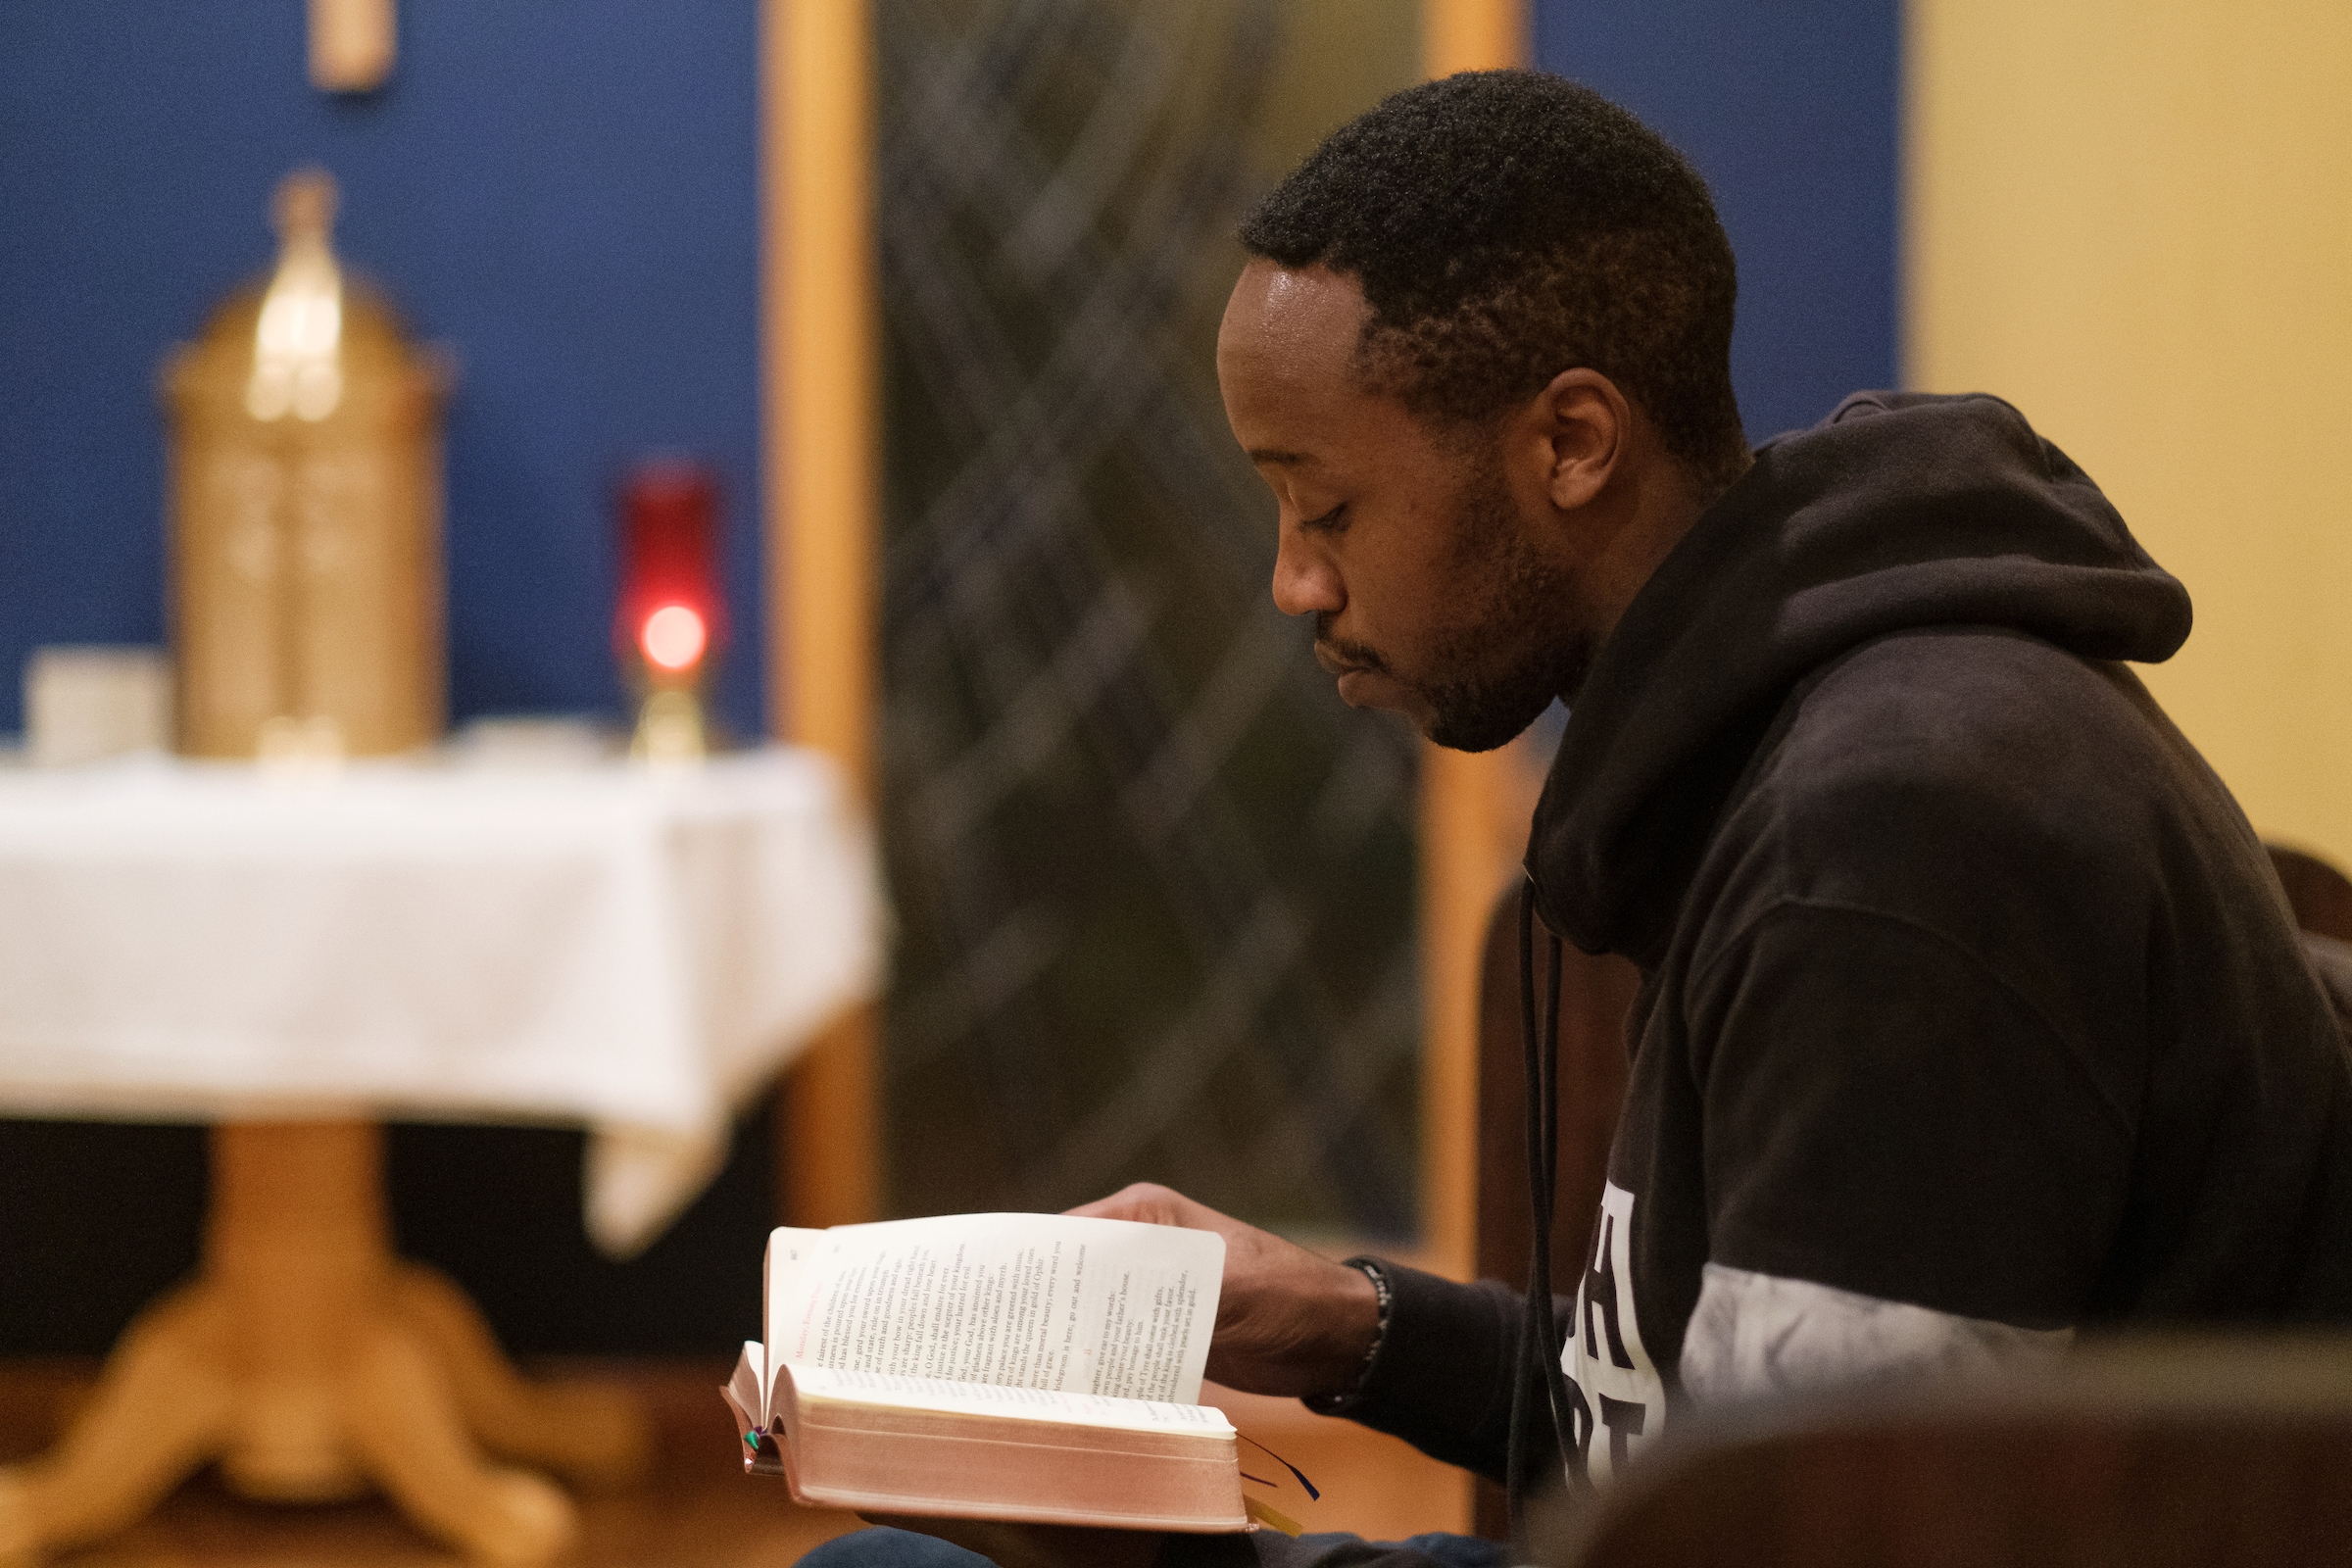 Seminarian Patrick Mbuiyu takes part in evening prayers at the Vianney House on Monday, January 21, 2019 in Seattle. (PHOTO by Stephen Brashear) Book, Chapel, Prayer